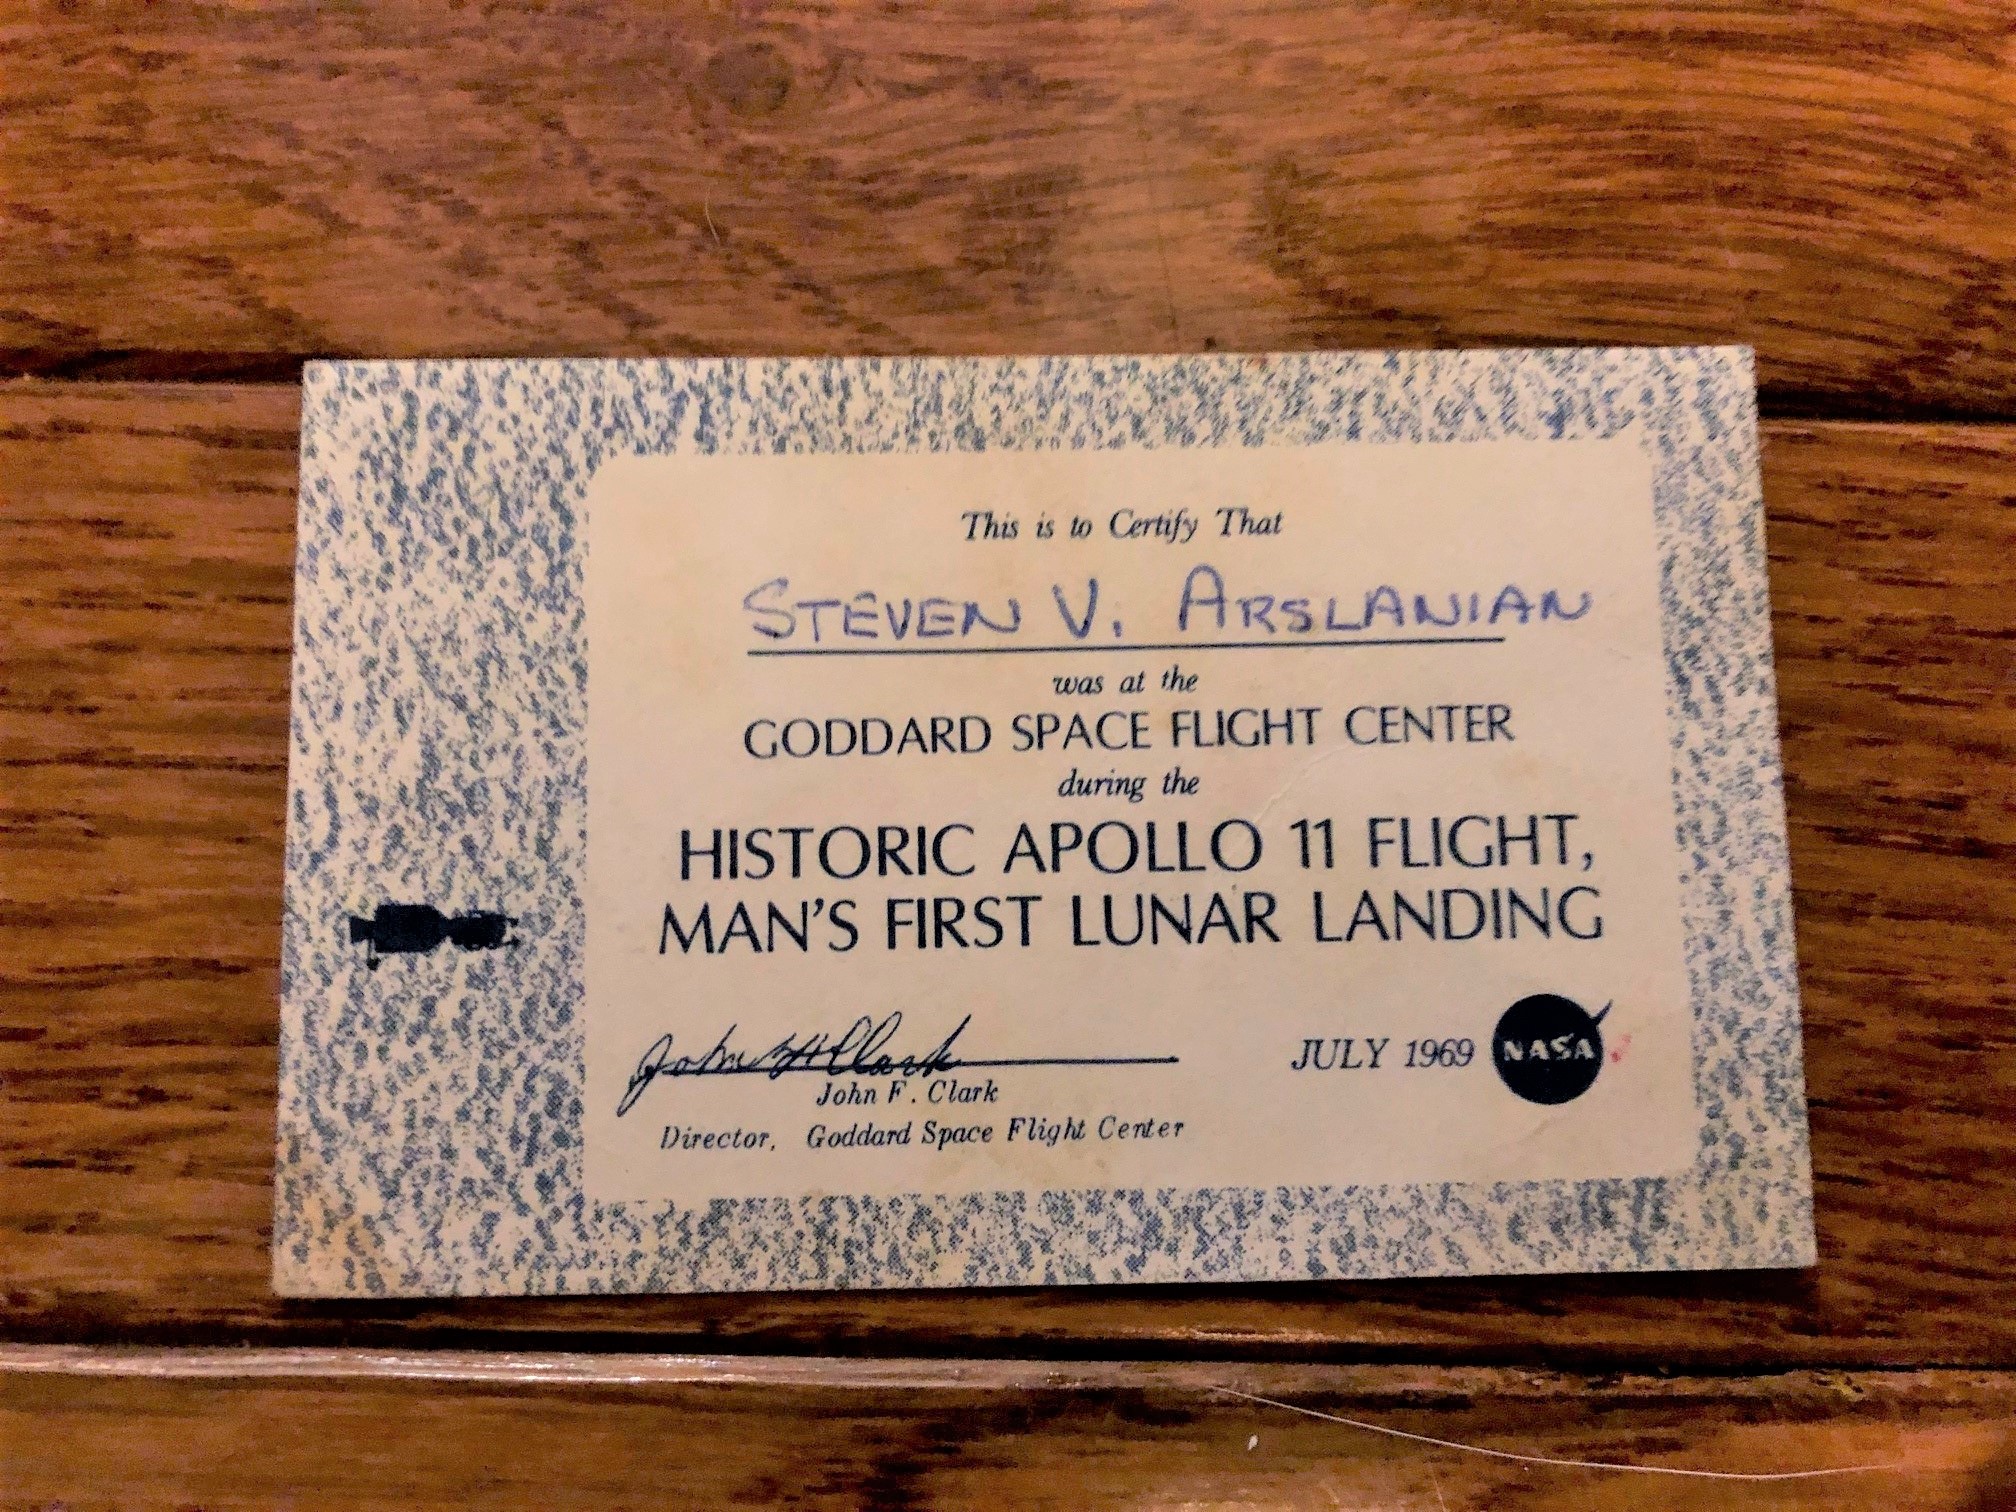 A card sitting on a table. Text reads "This is to certify that Steven V. Arslanian was at the Goddard Space Flight Center during the historic Apollo 11 flight, man's first lunar landing." A signature, date (July 1969), and logo are at the bottom.